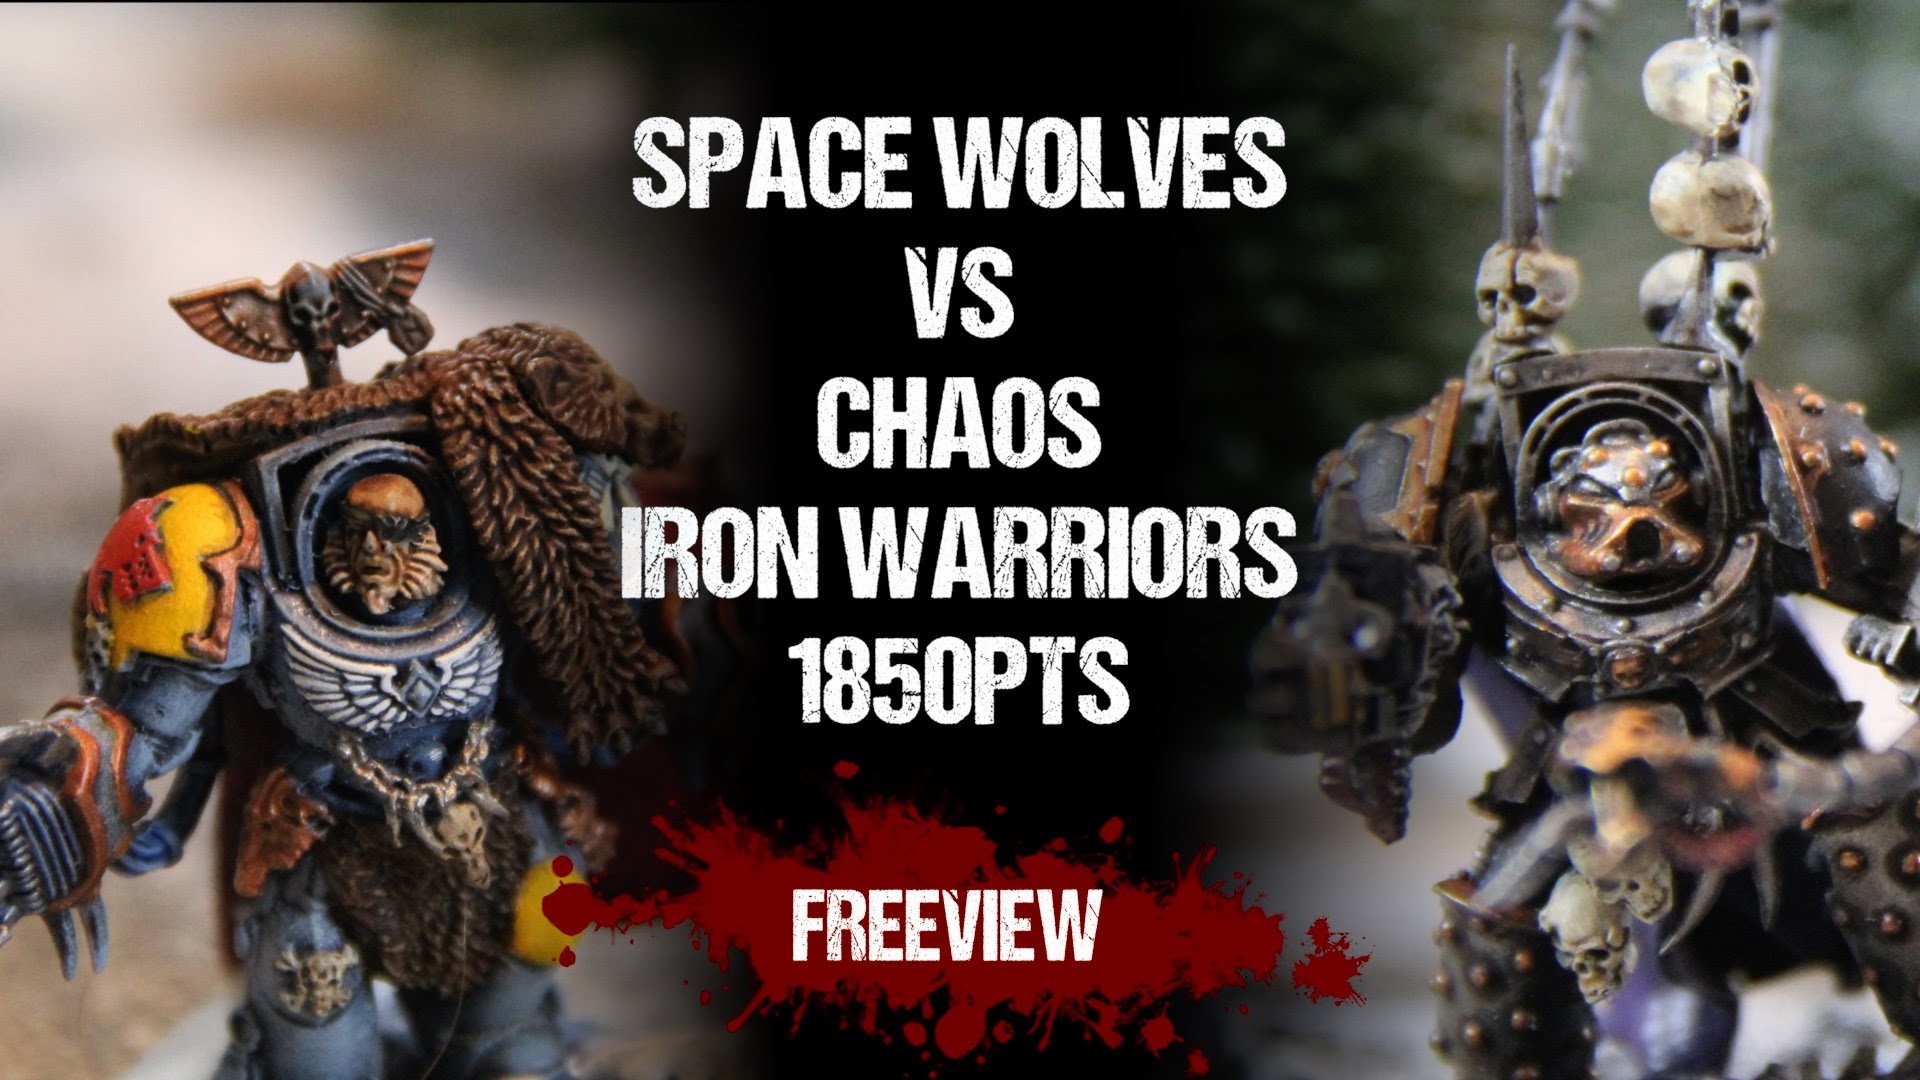 1920x1080 Warhammer 40,000 Battle Report: Space Wolves vs Chaos Iron Warriors 1850pts  - YouTube